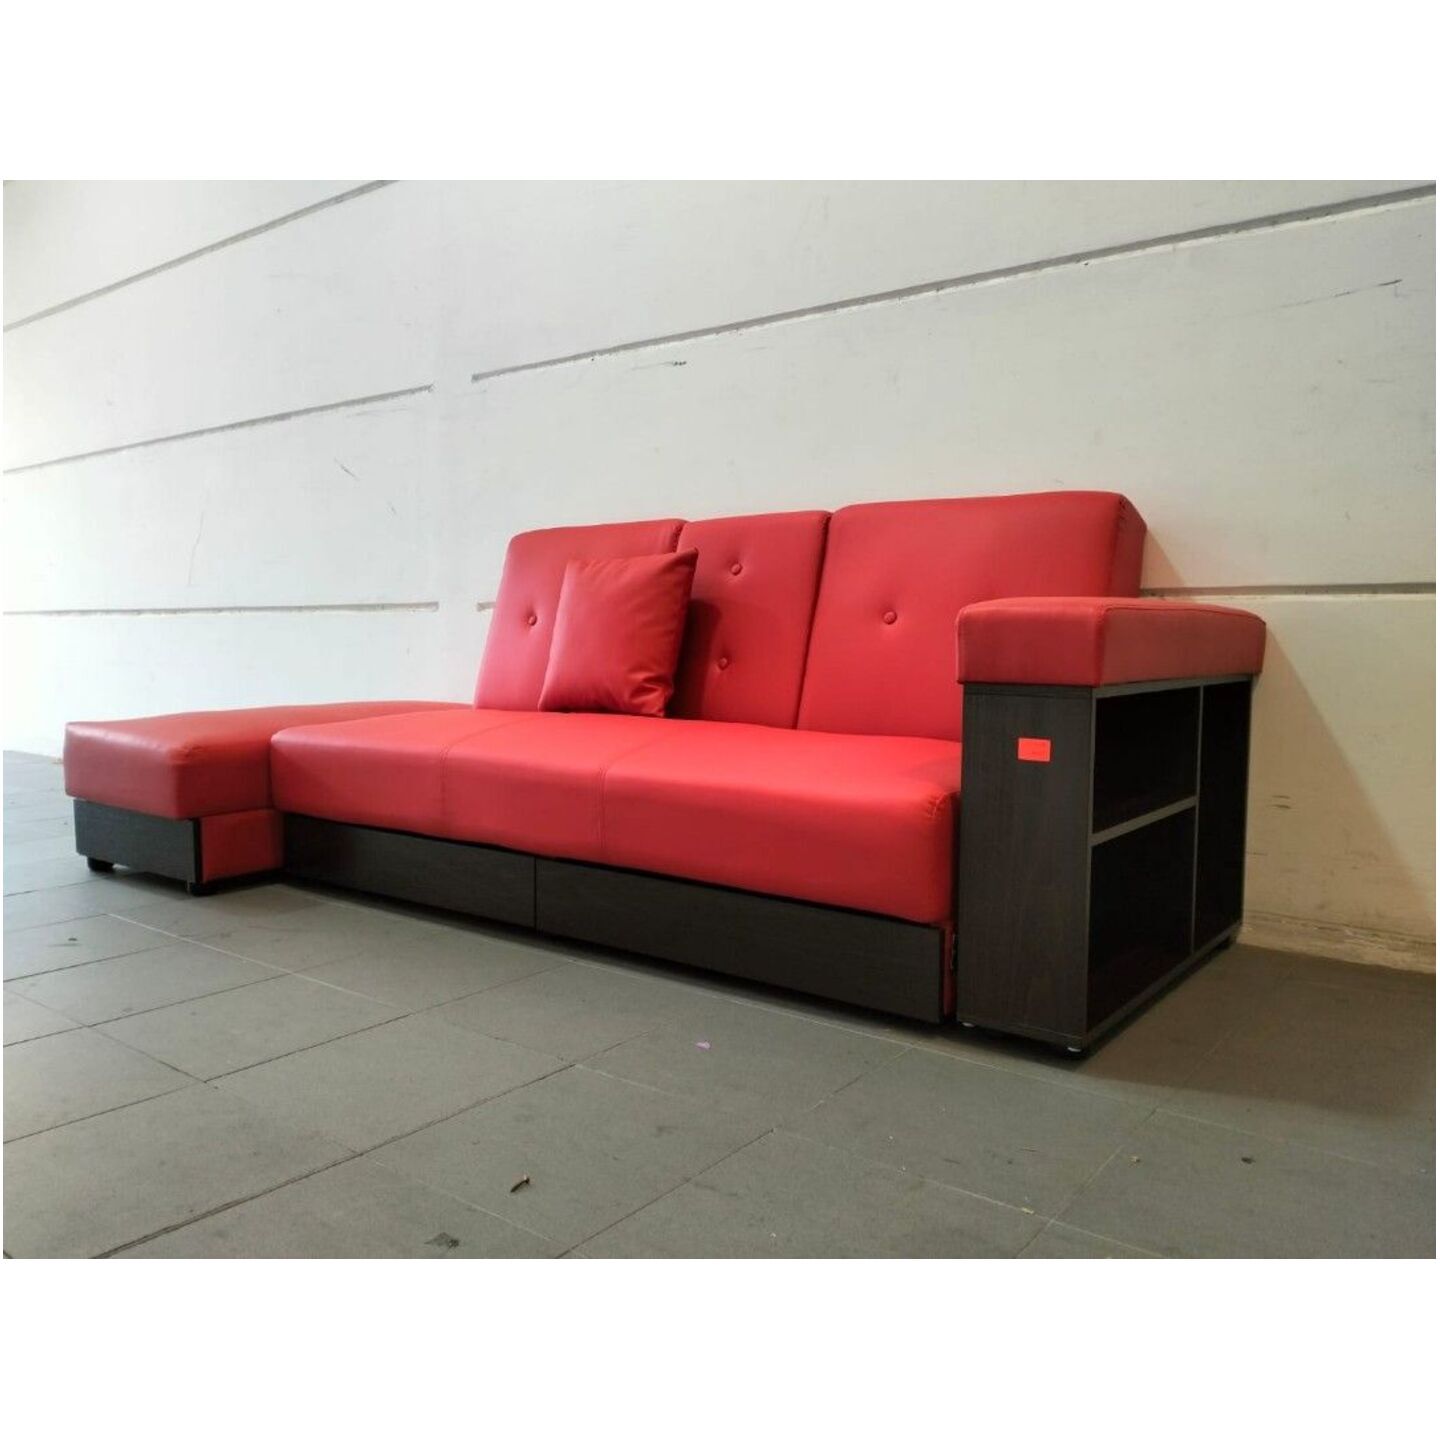 MIKO Storage Sofa Bed in RED PVC